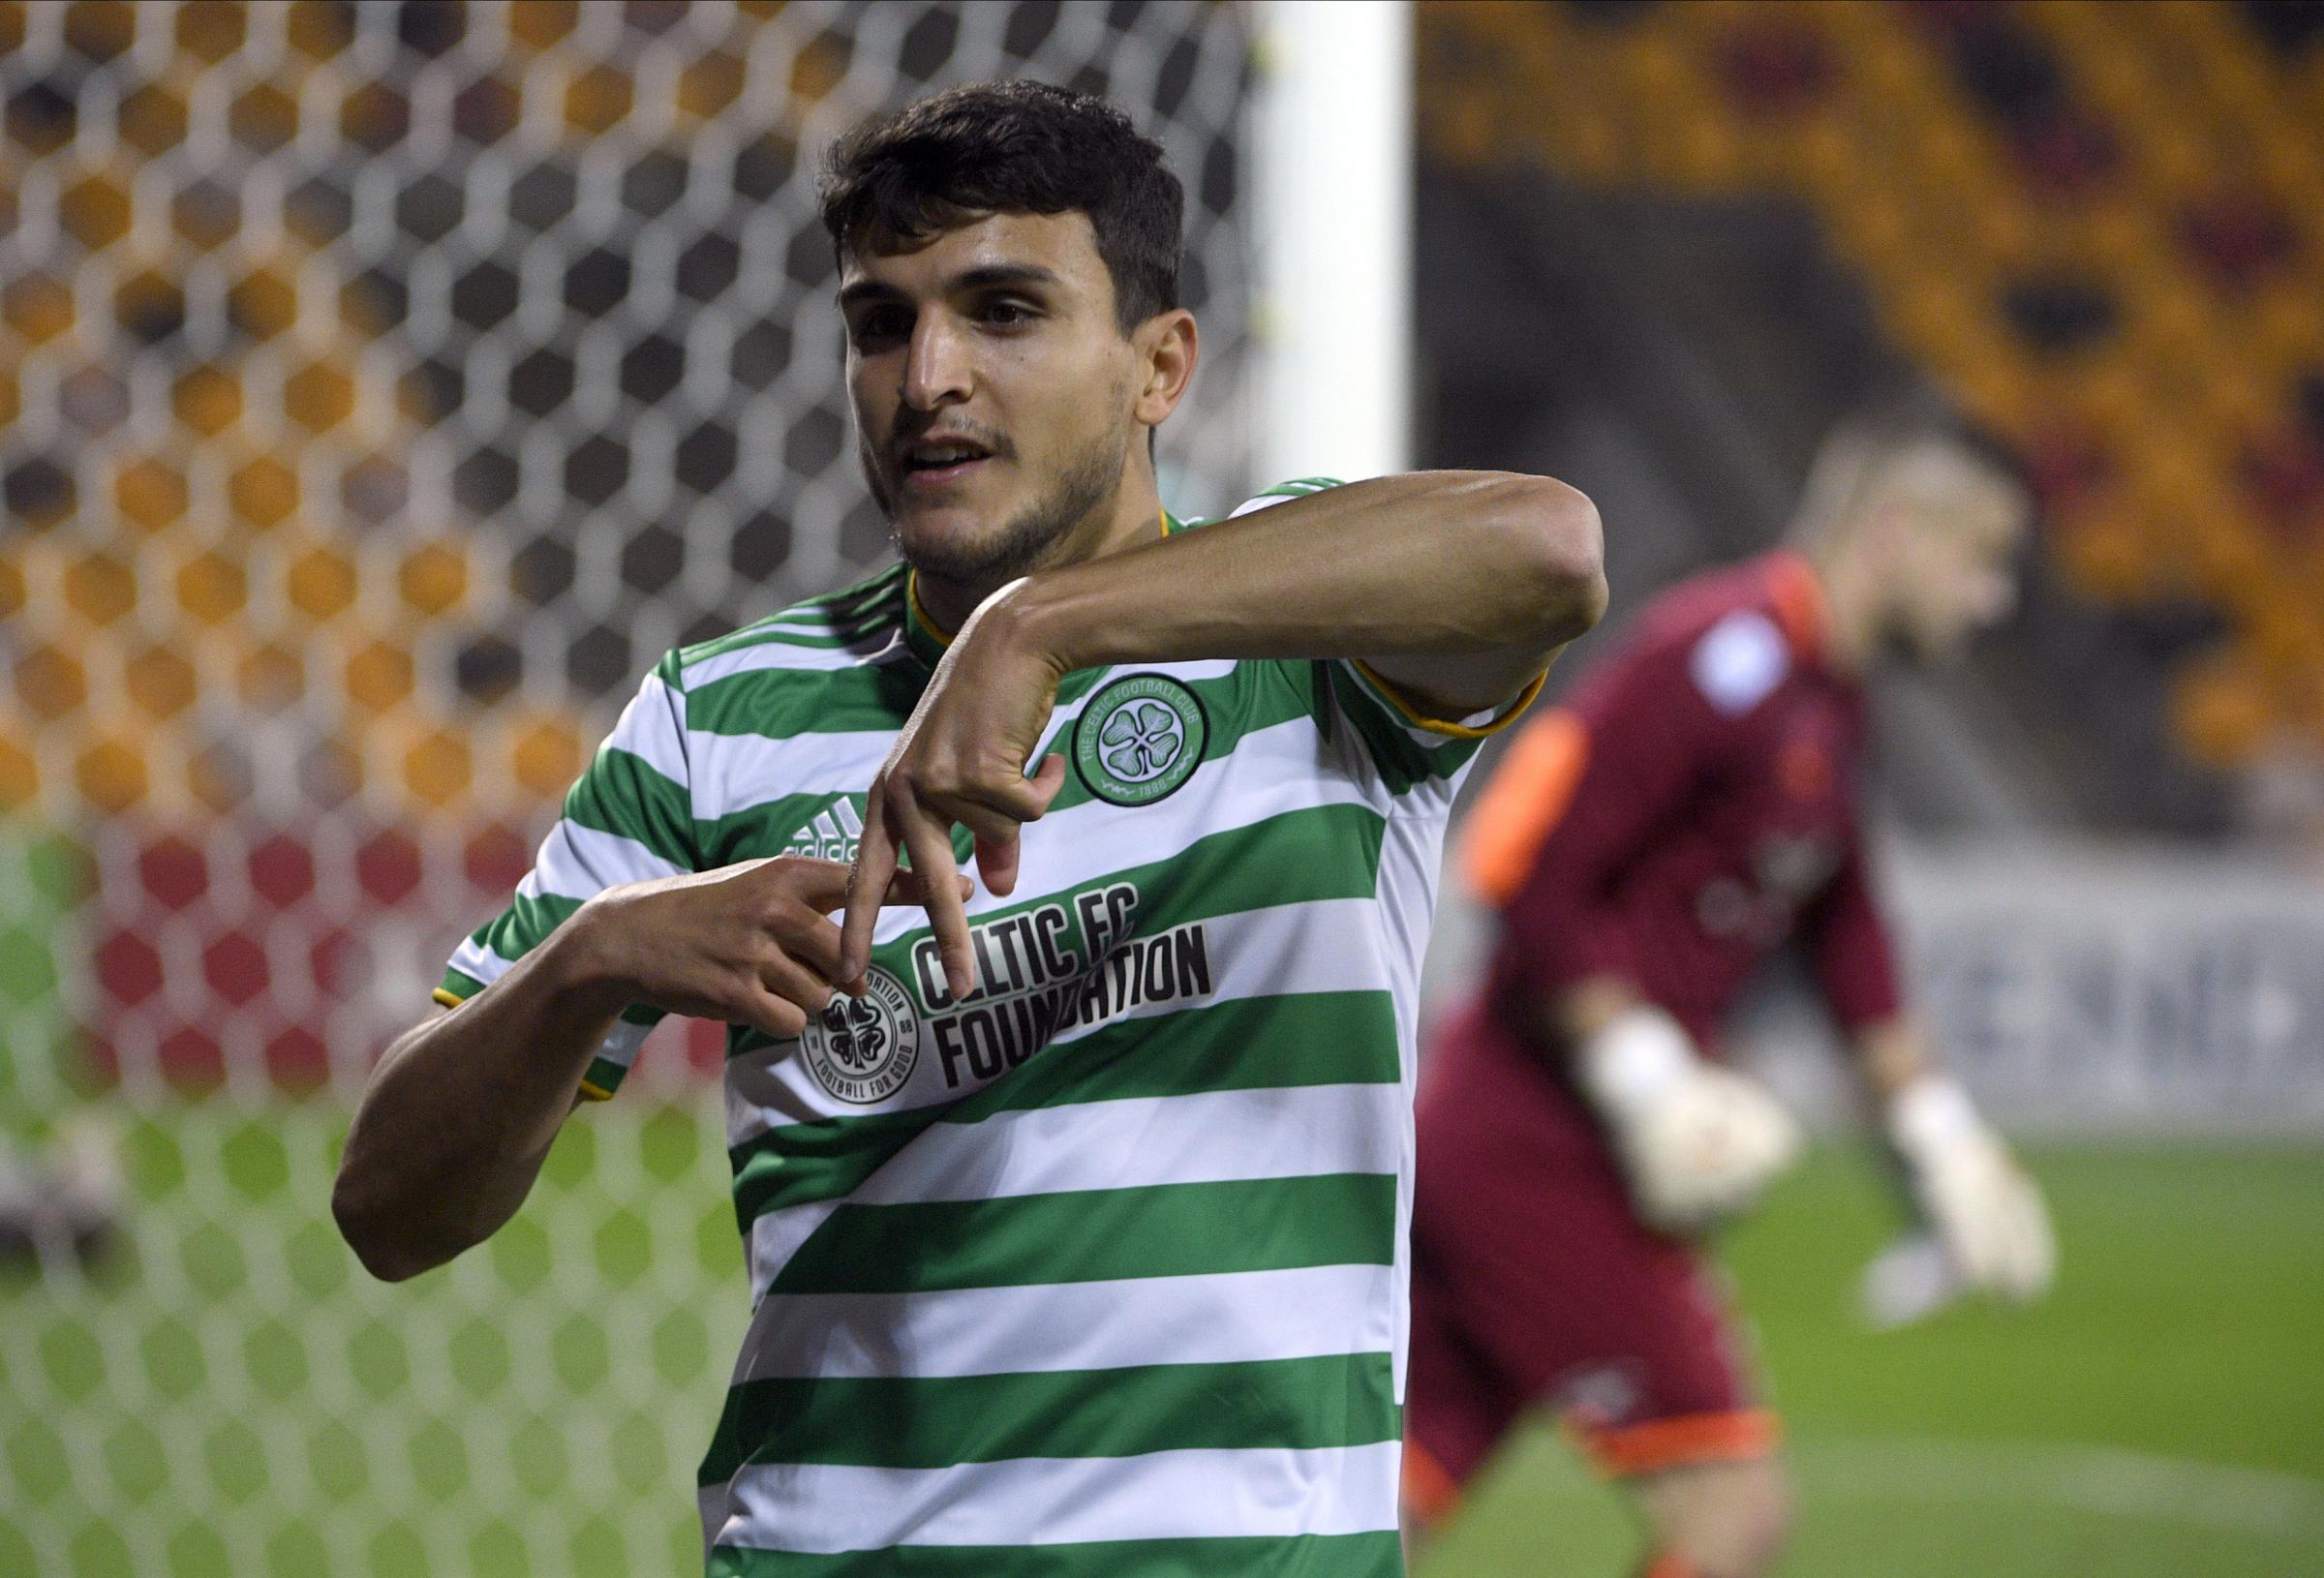 Super-sub Elyounoussi eager to claim starting spot at loan club Celtic